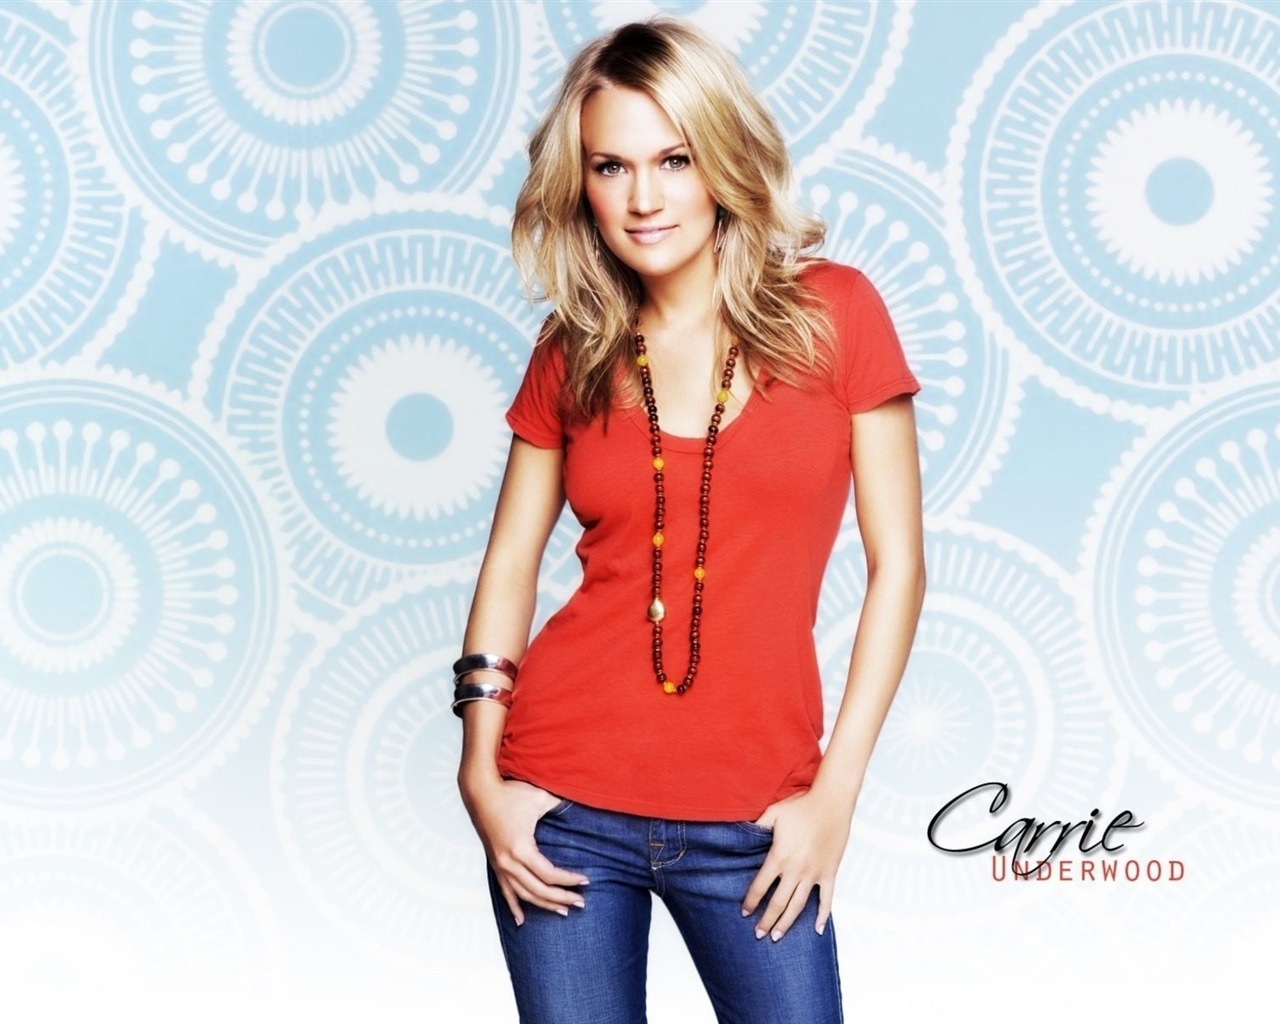 Carrie Underwood #006 - 1280x1024 Wallpapers Pictures Photos Images